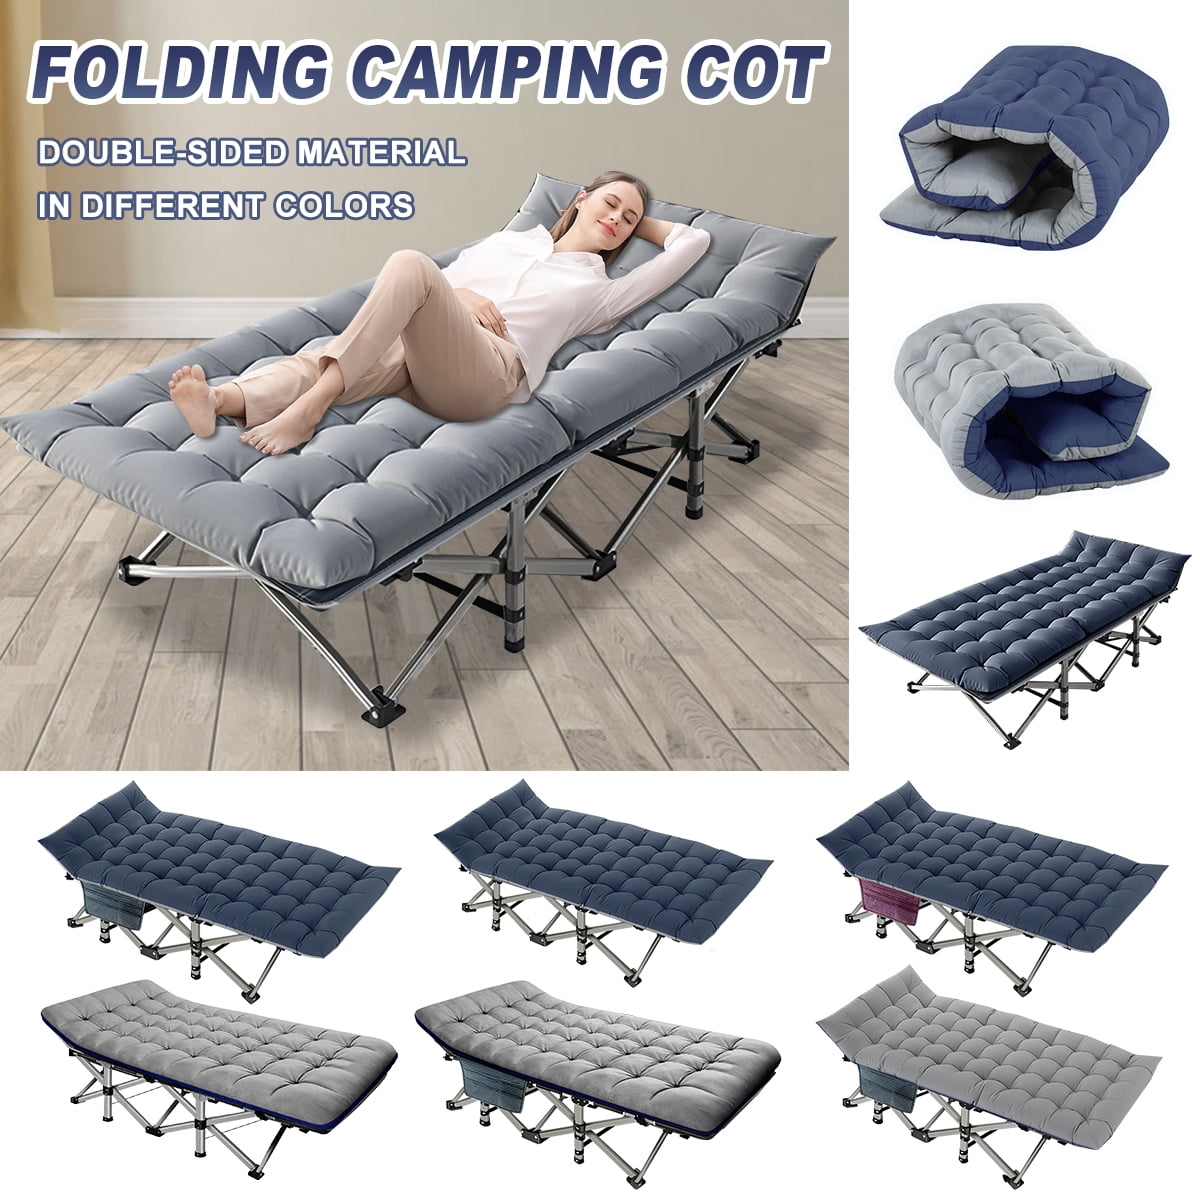 Adult Camping Cot Folding Bed Heavy Duty Collapsible Sleeping Bed w/Carry Bag US 